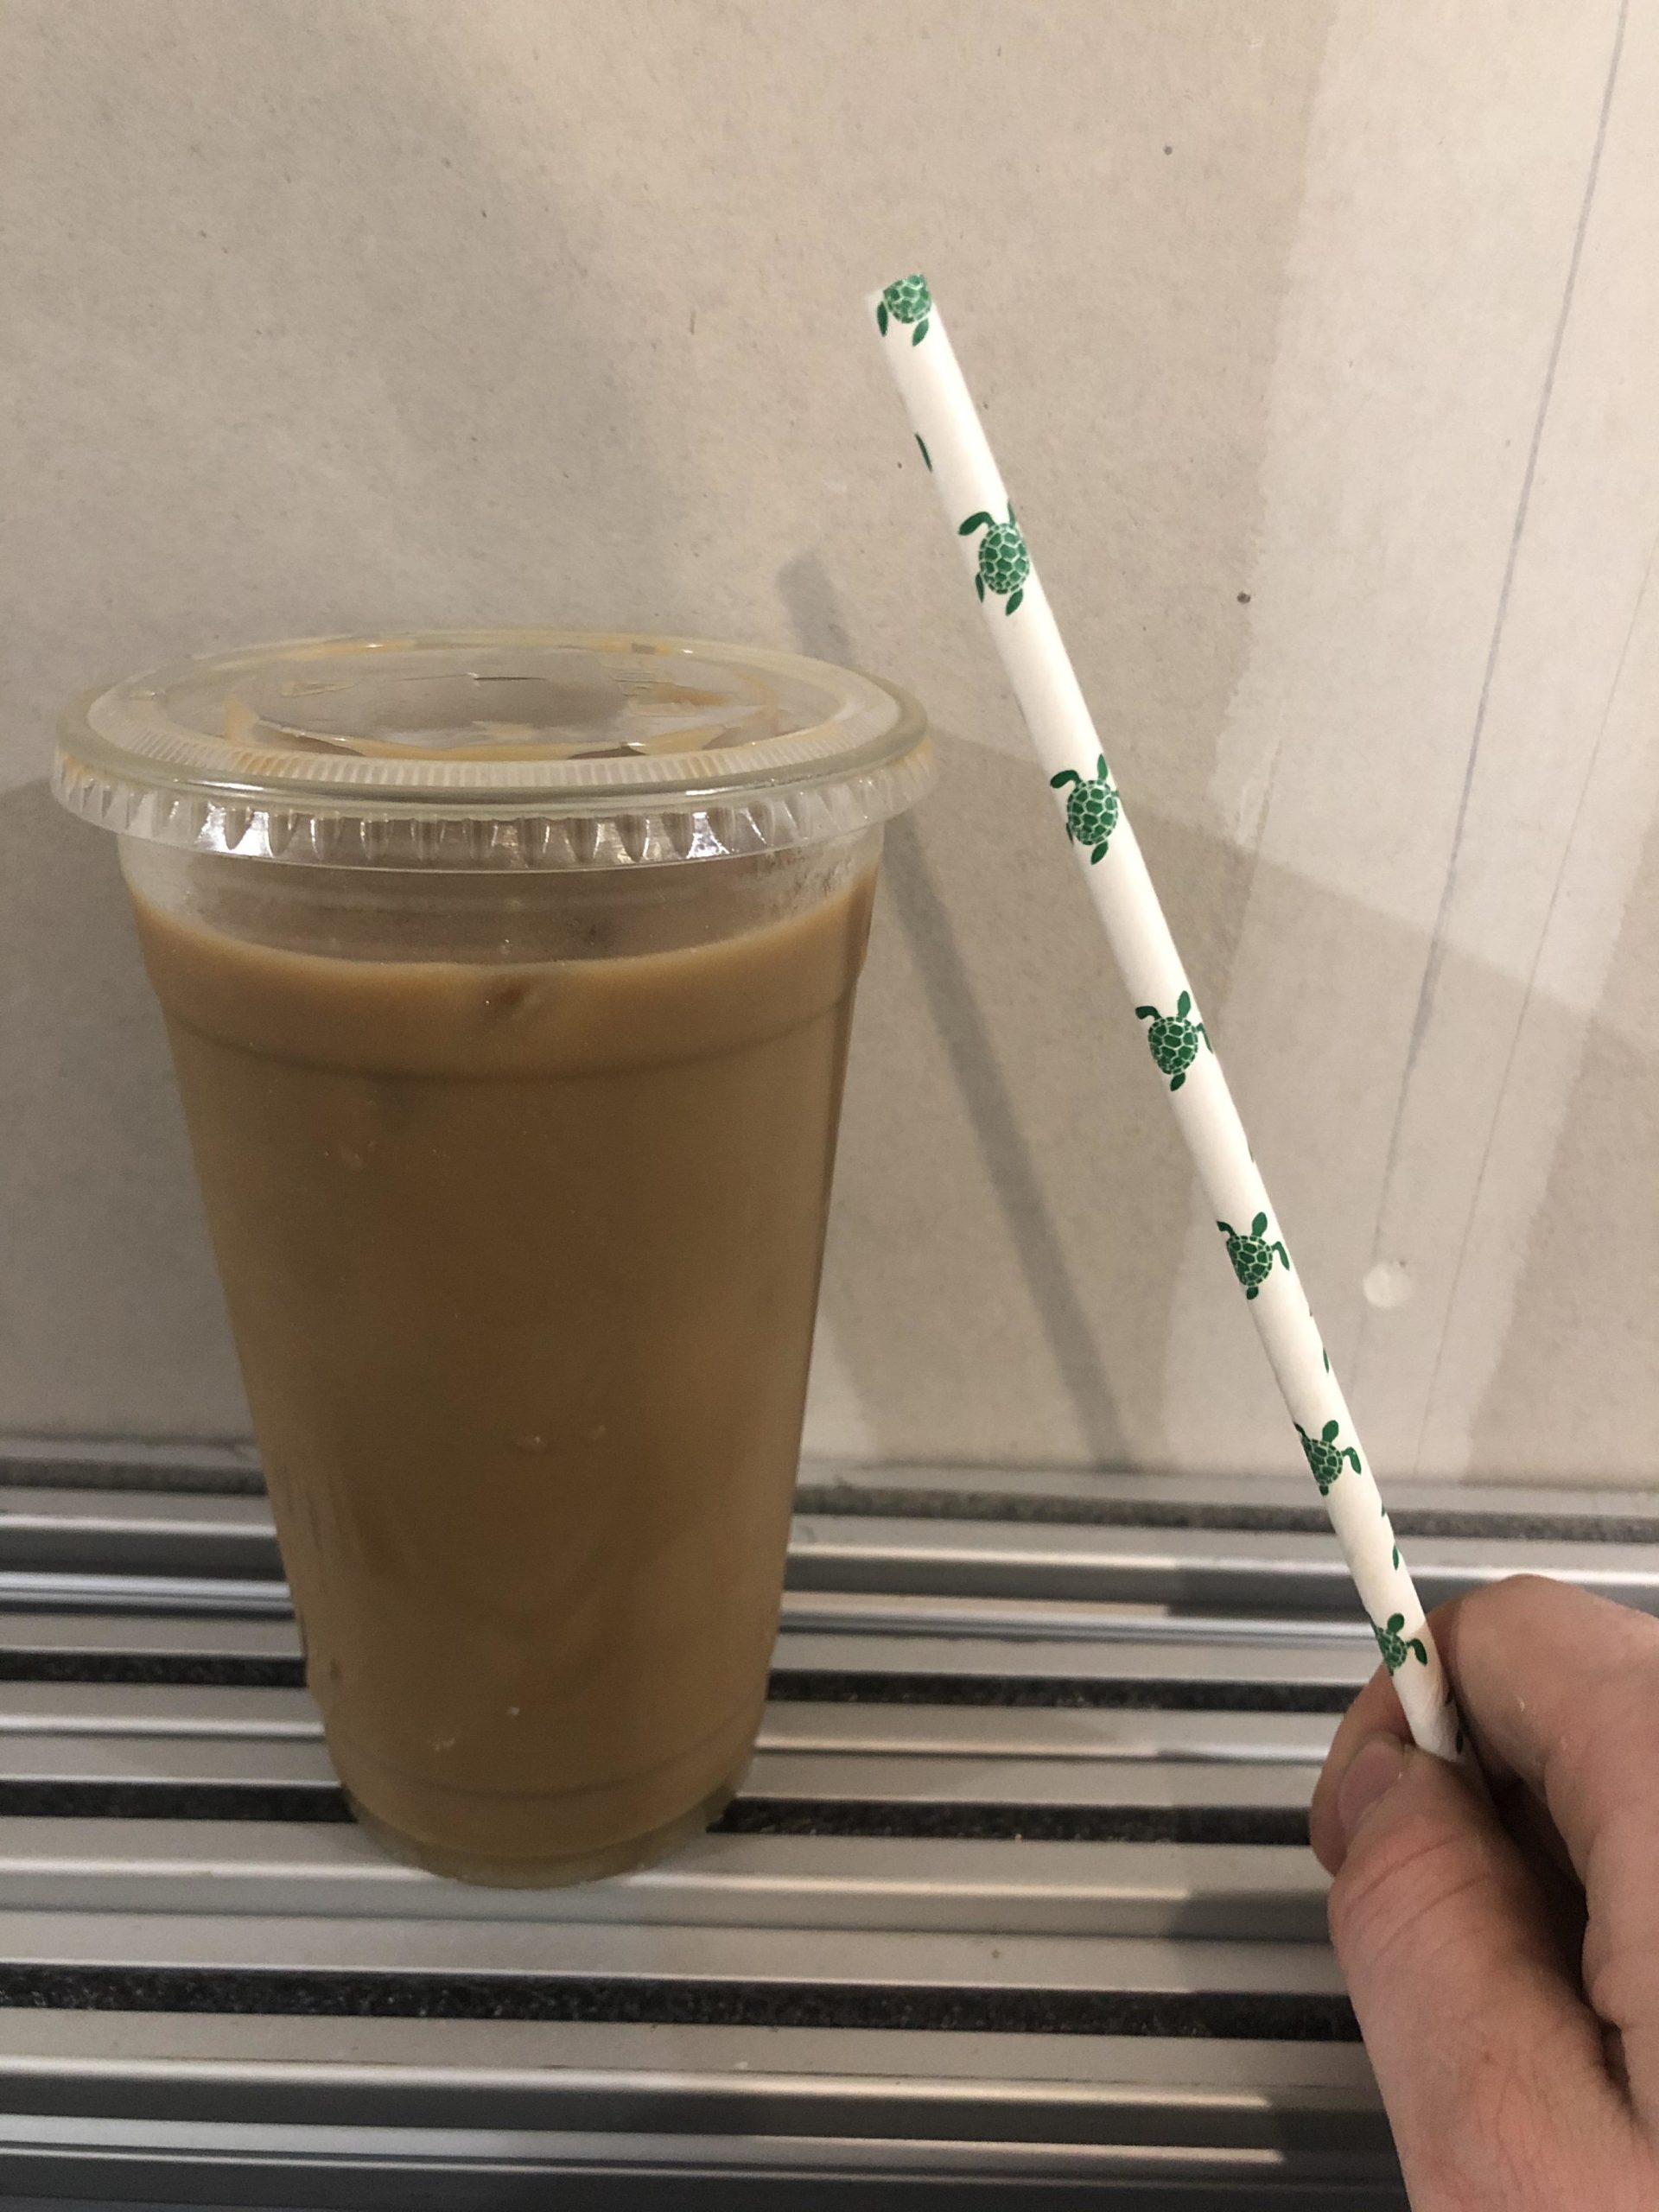 Paper+straws+are+for+the+turtles.